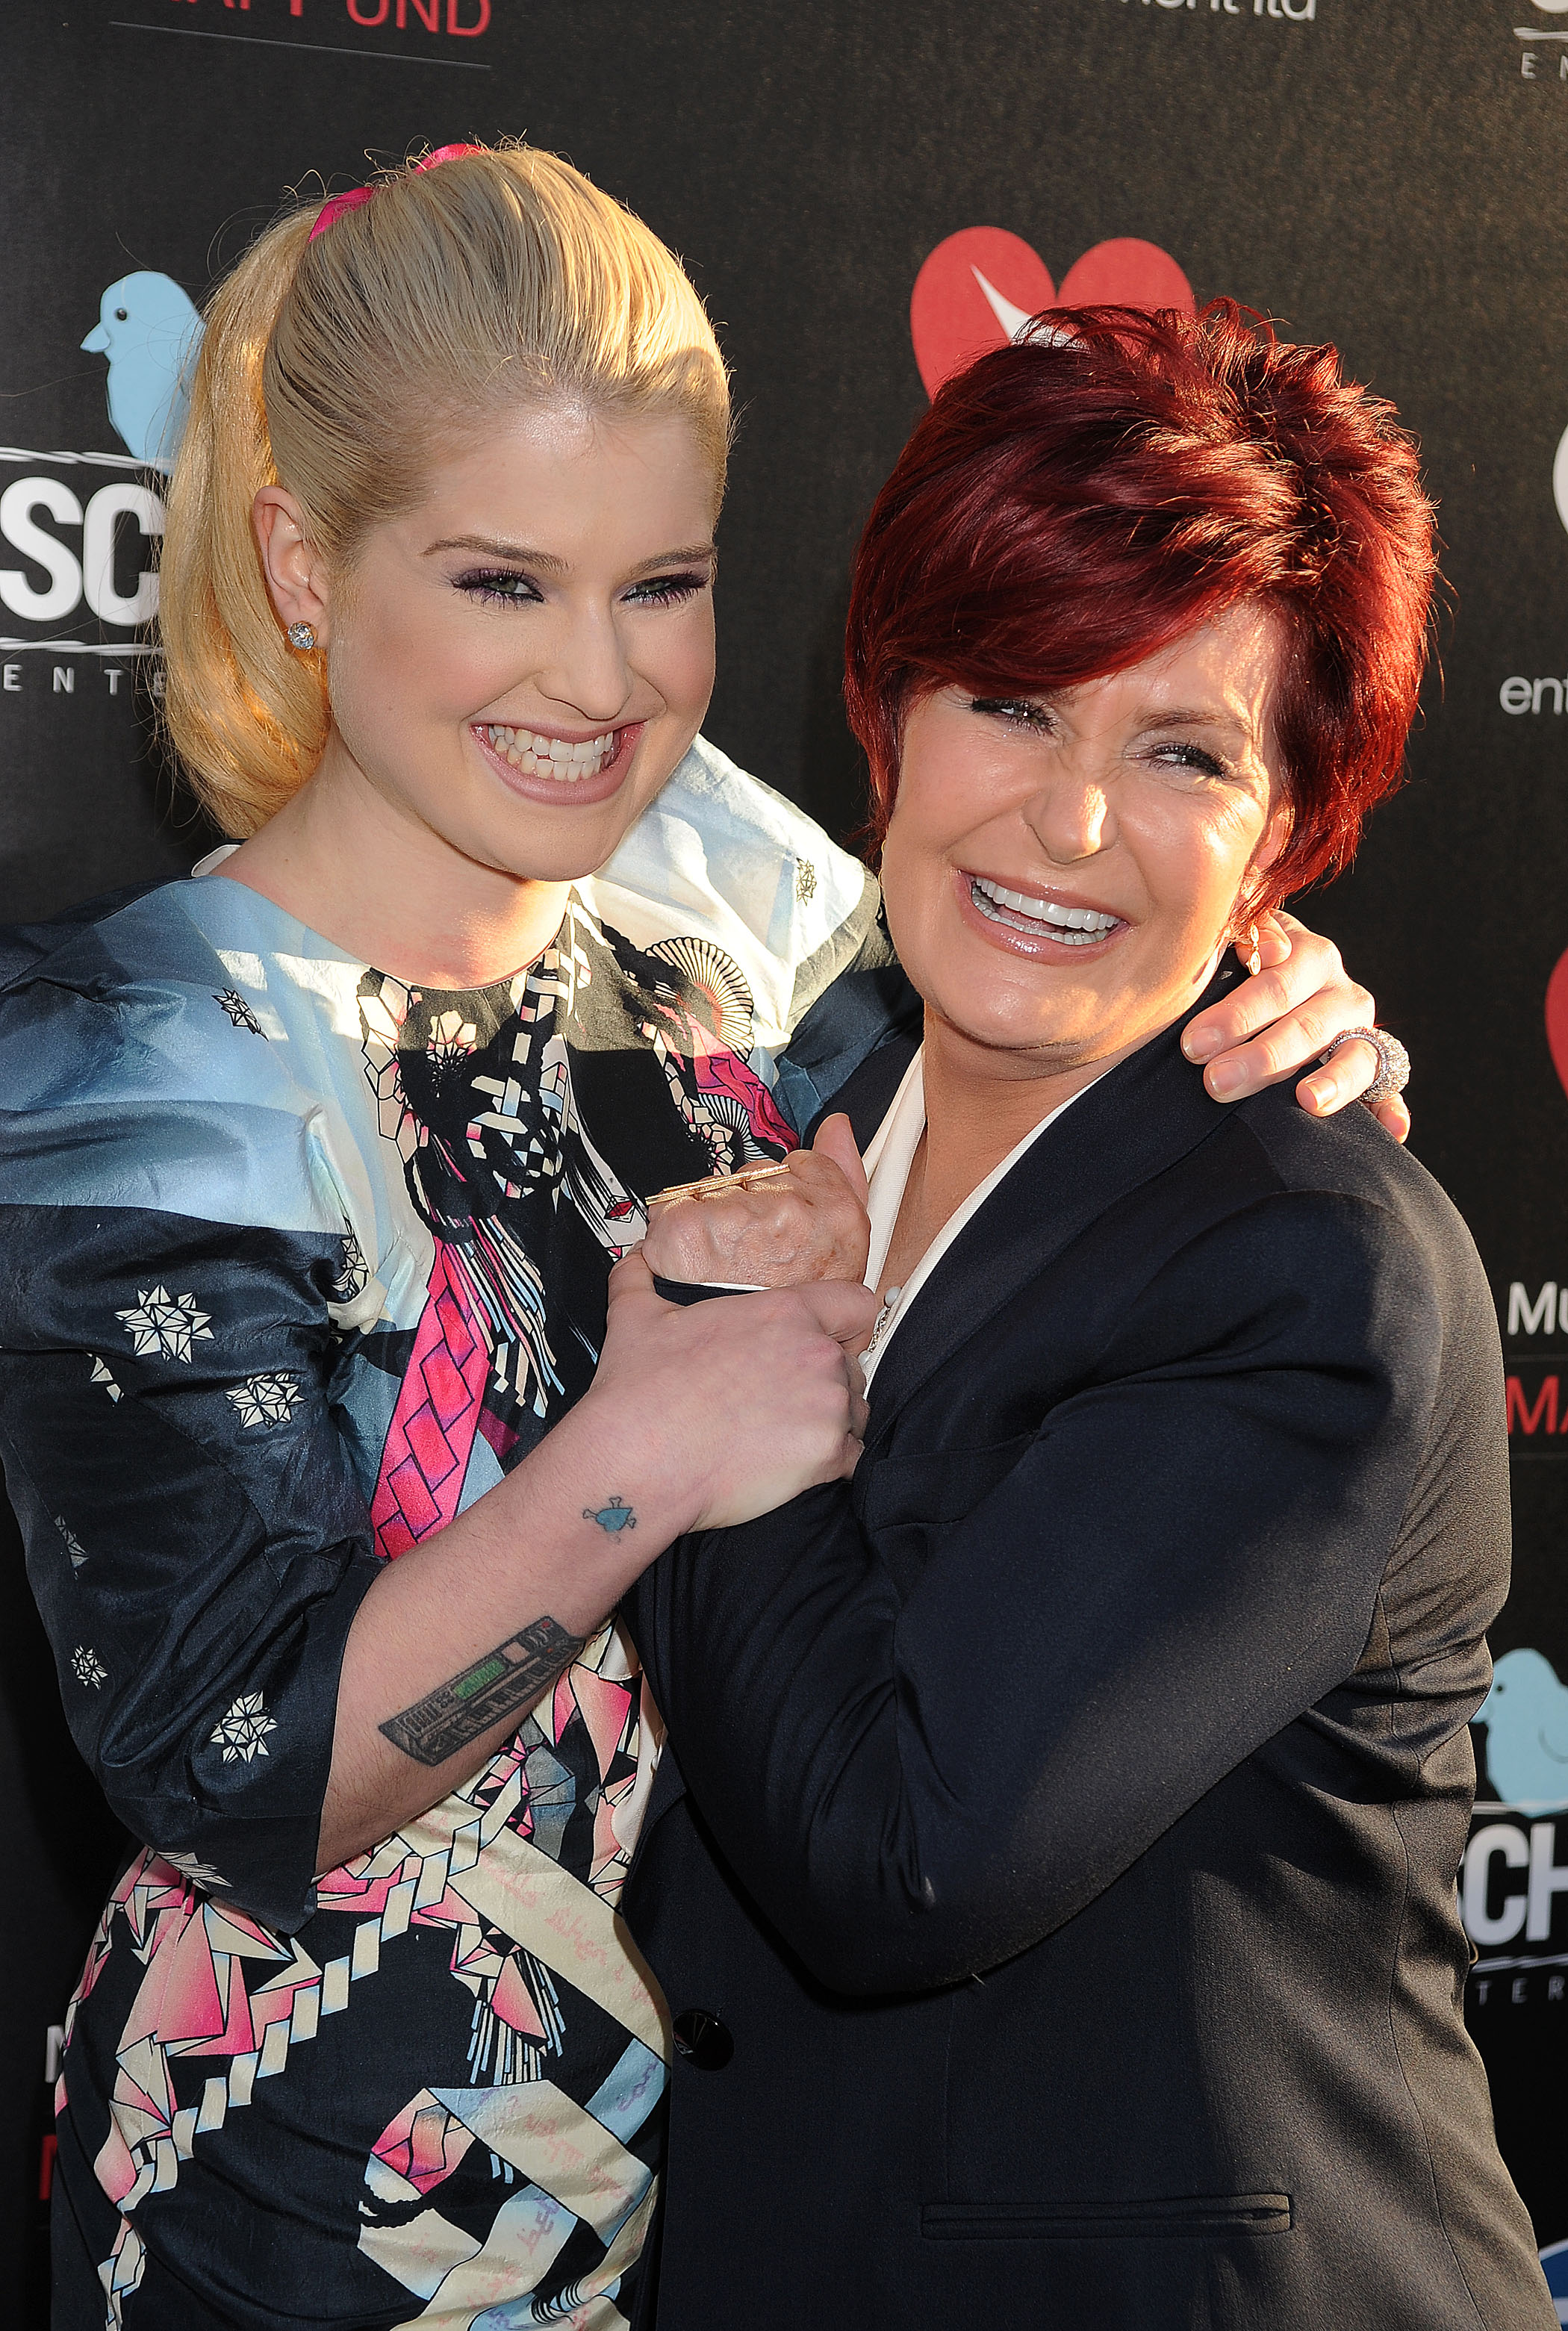 Kelly and Sharon Osbourne at Screening Of "God Bless Ozzy Osbourne" To Benefit The Musicares Map Fund in 2011 | Source: Getty Images